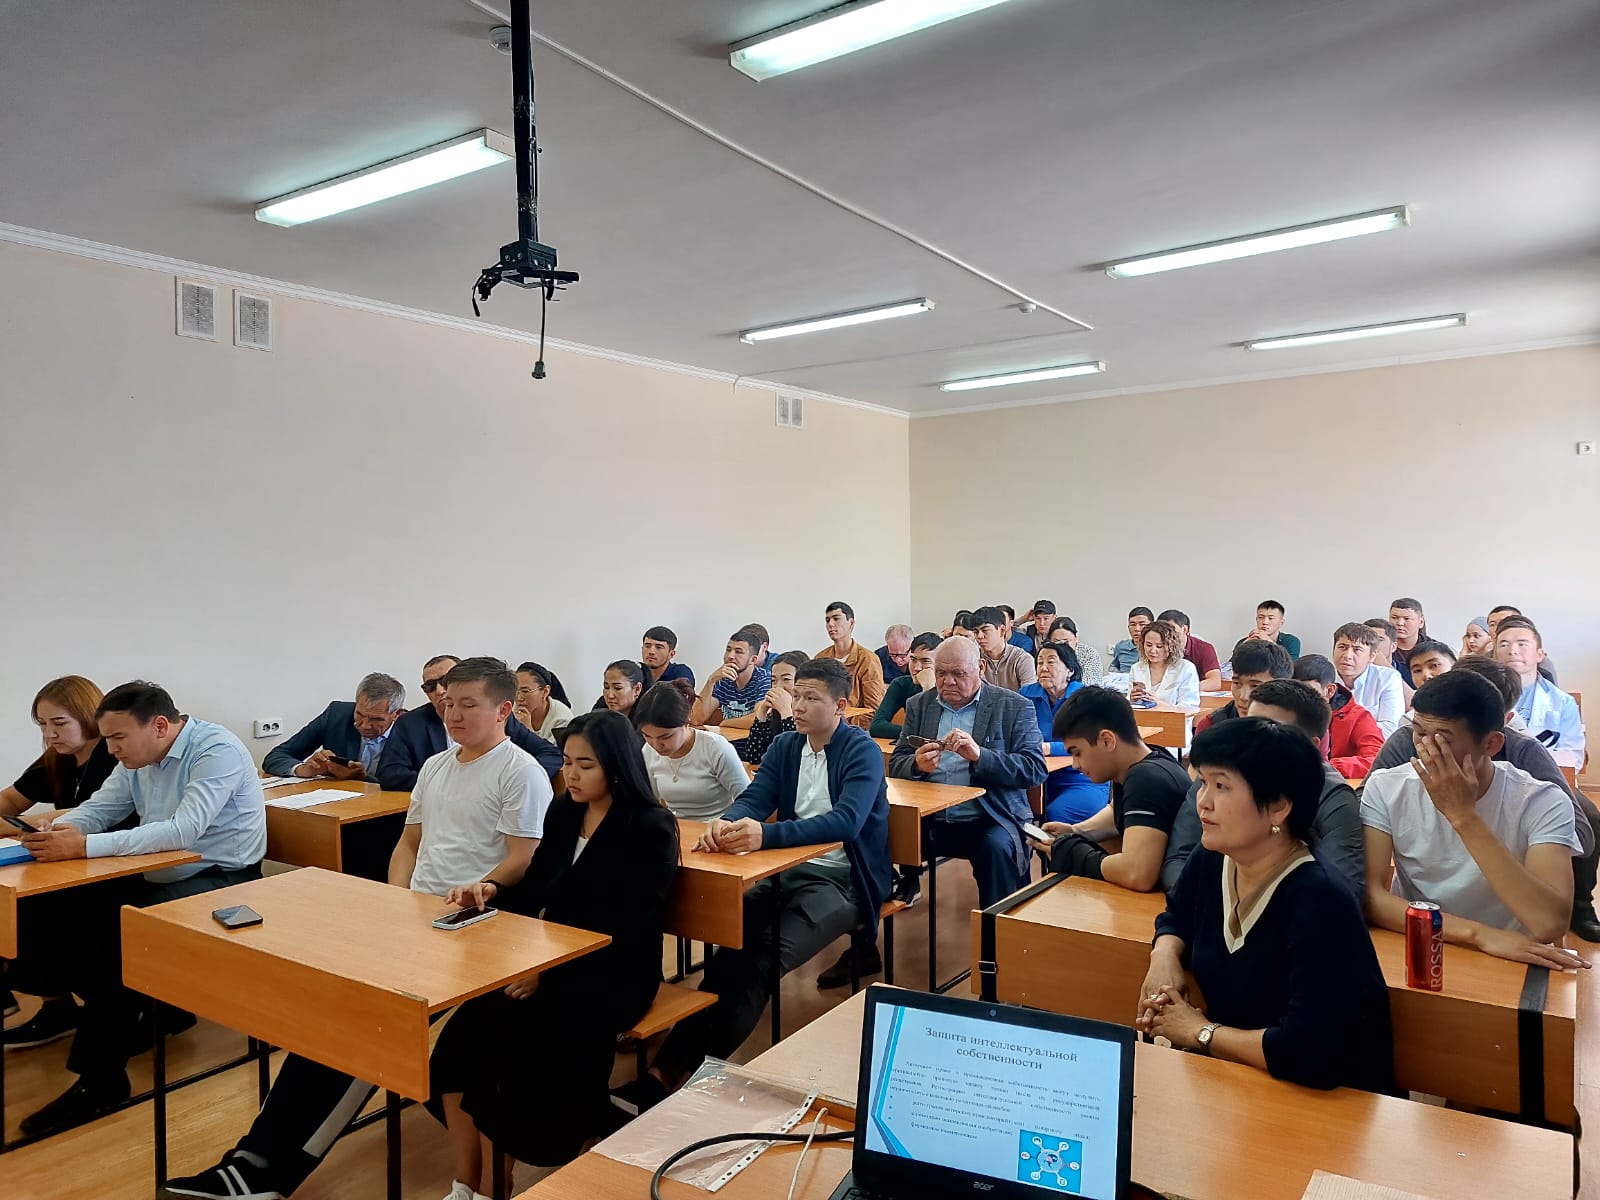 The seminar &quot;Intellectual property&quot; was provided at the Agrarian Faculty